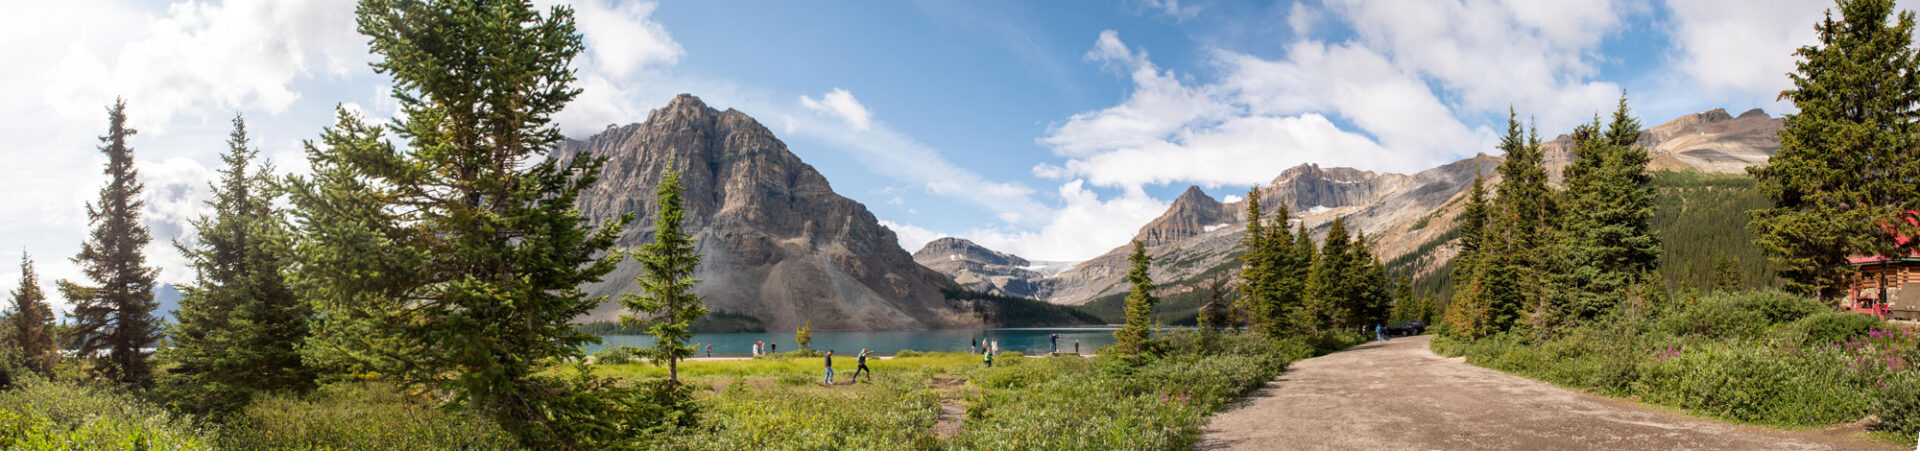 small groups tour, west canada, hiking, bus tour, activities